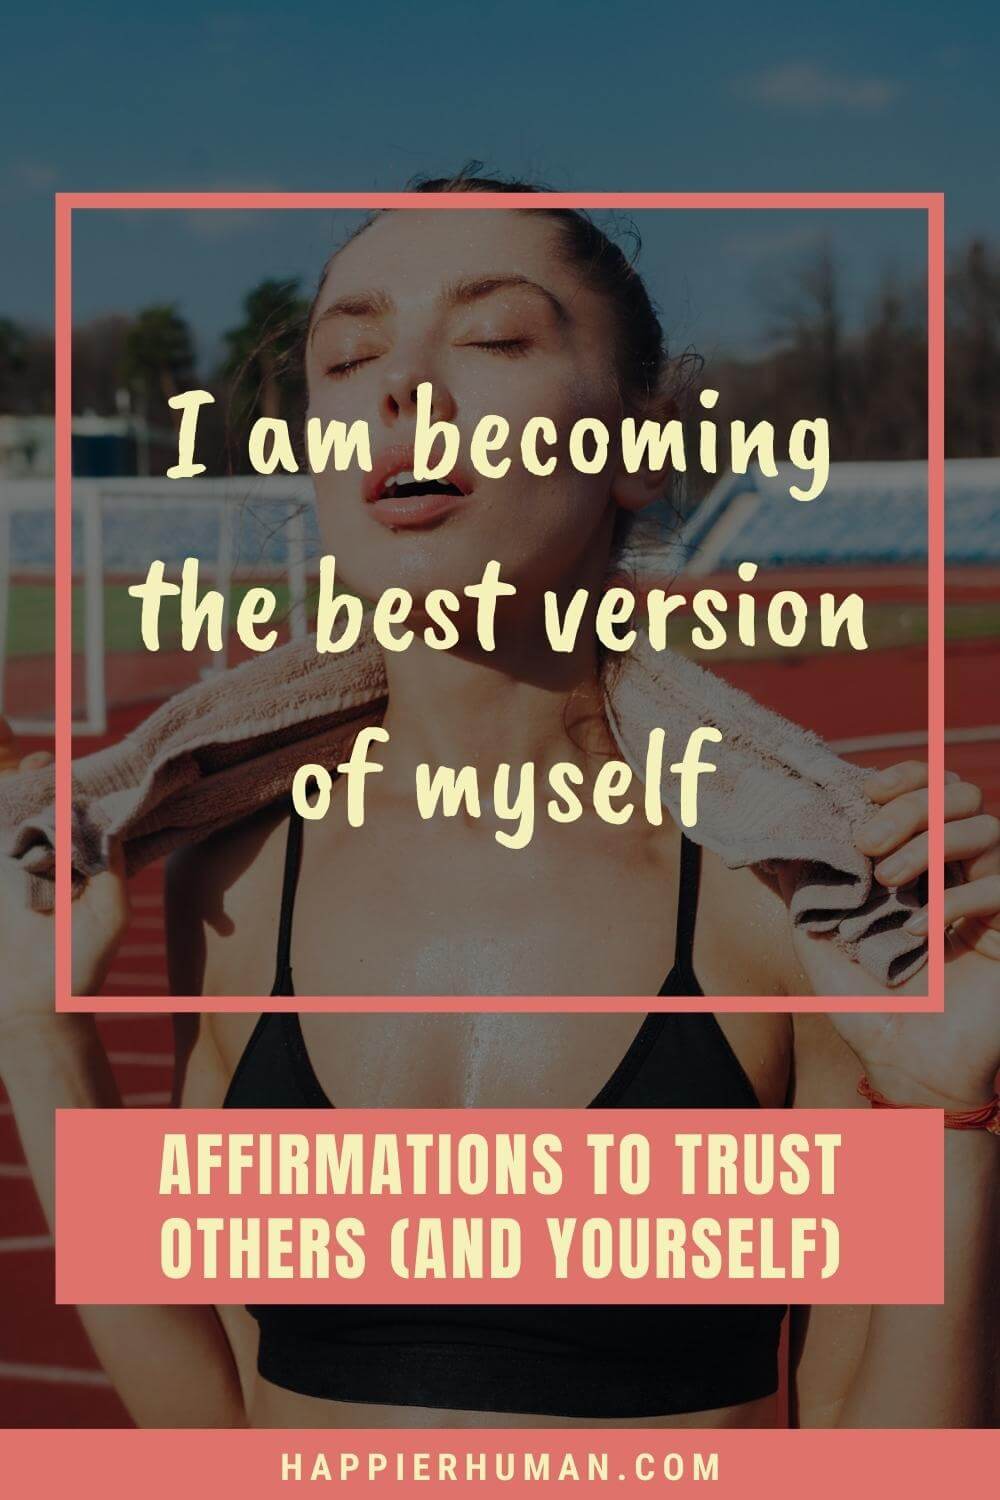 Affirmations For Trust - I am becoming the best version of myself | affirmations for trusting the universe | affirmations for hope | affirmations for trusting yourself